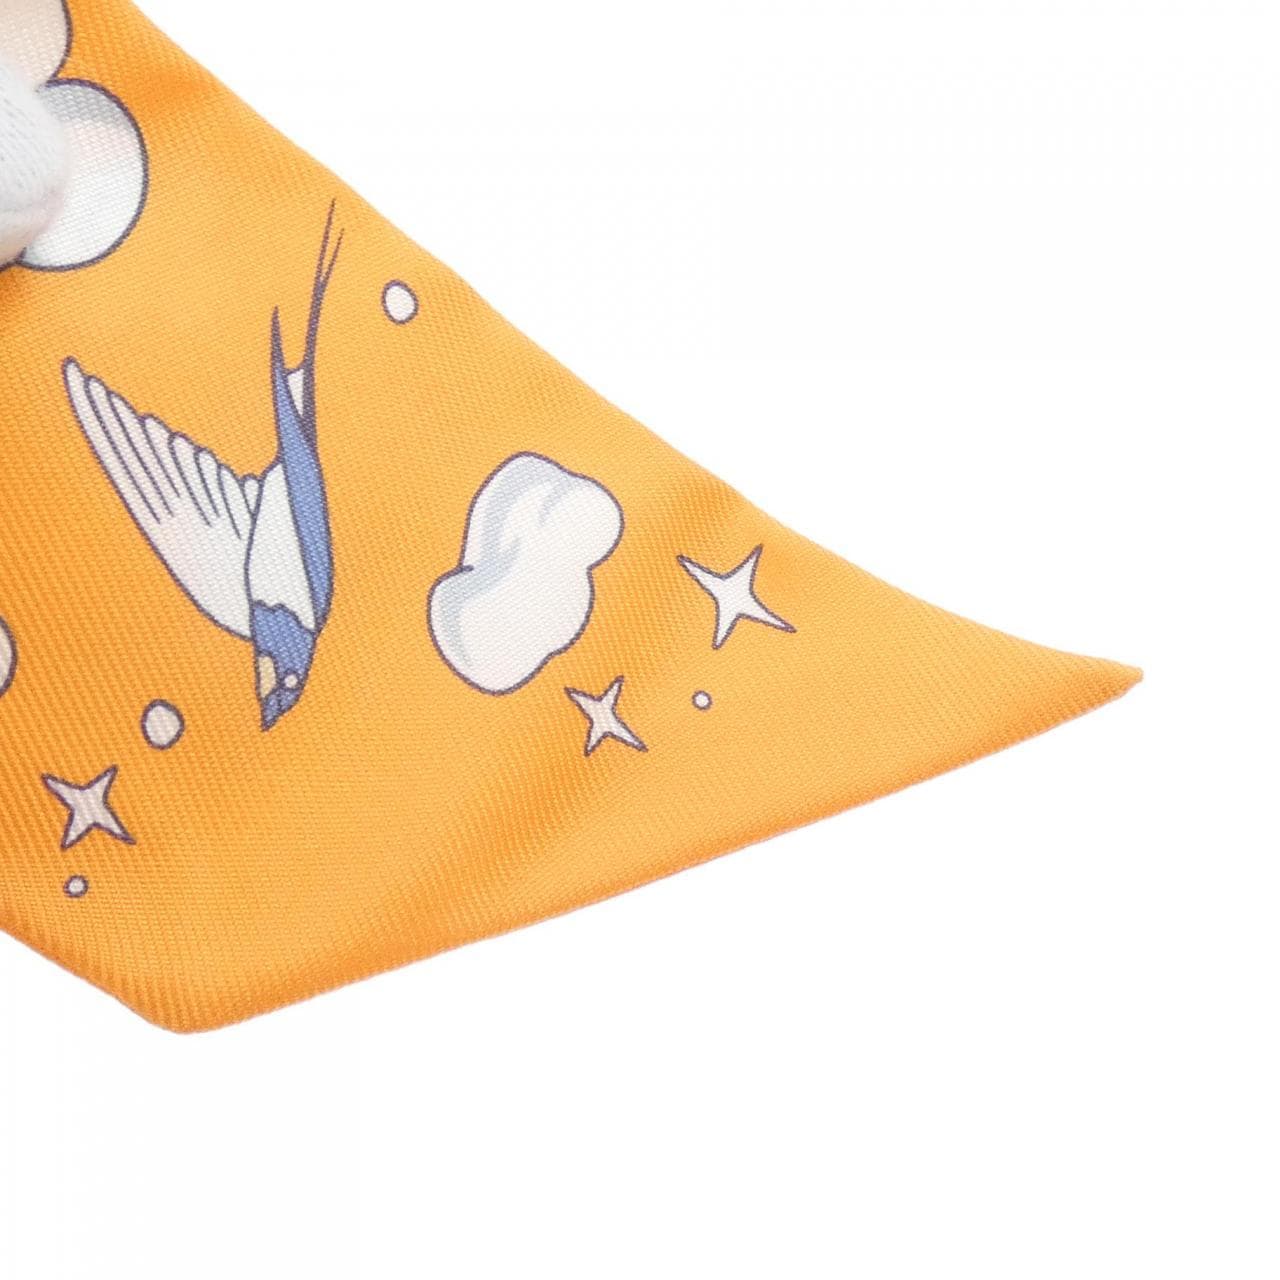 HERMES SUR MON NUAGE Twilly 063900S Scarf